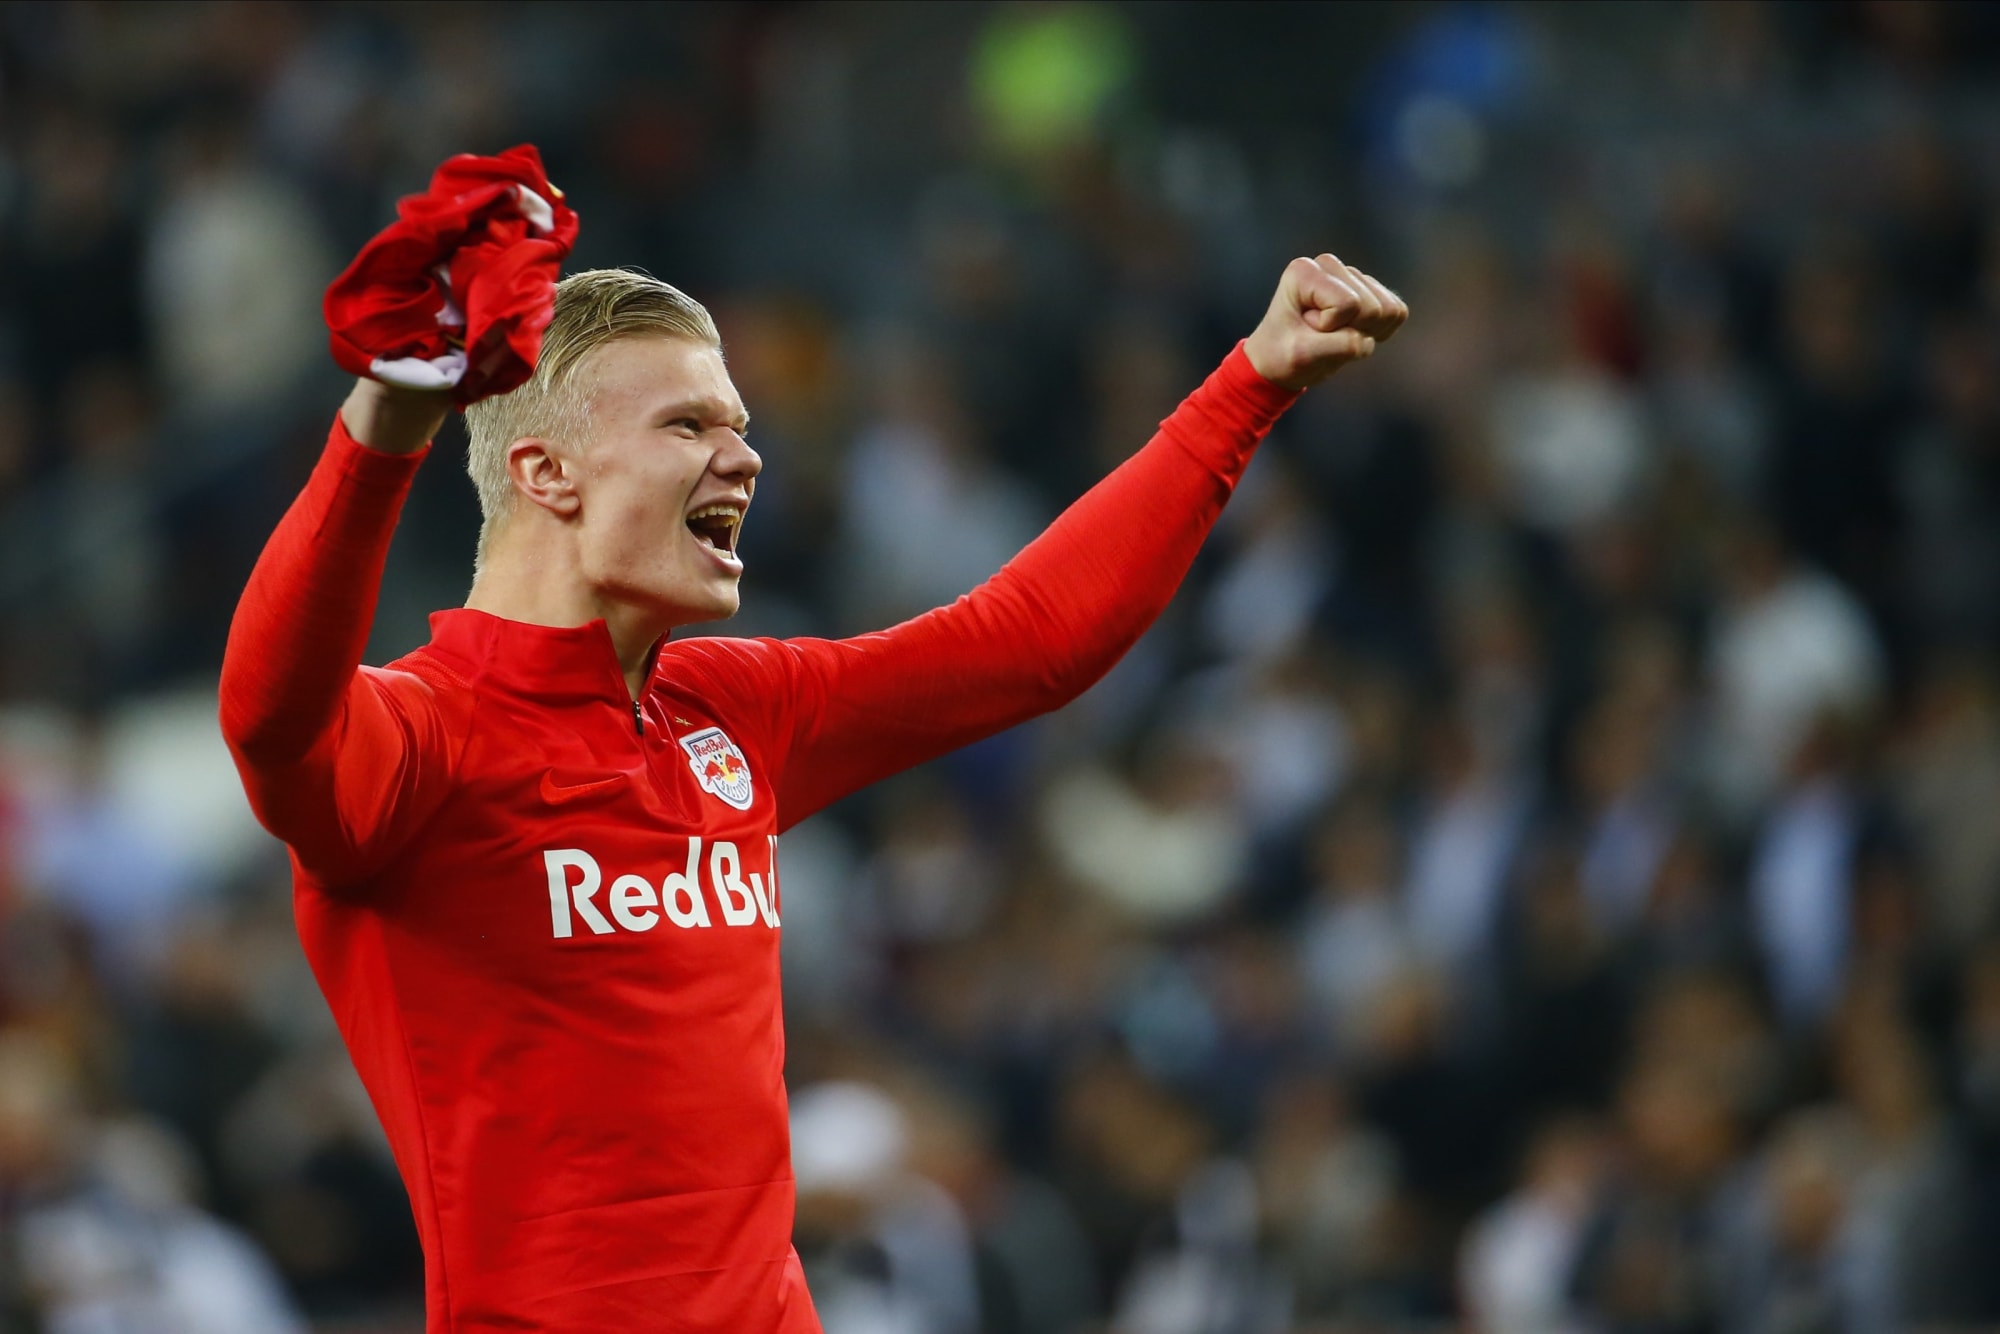 Bayern Munich reportedly monitor exciting Erling Braut Haaland